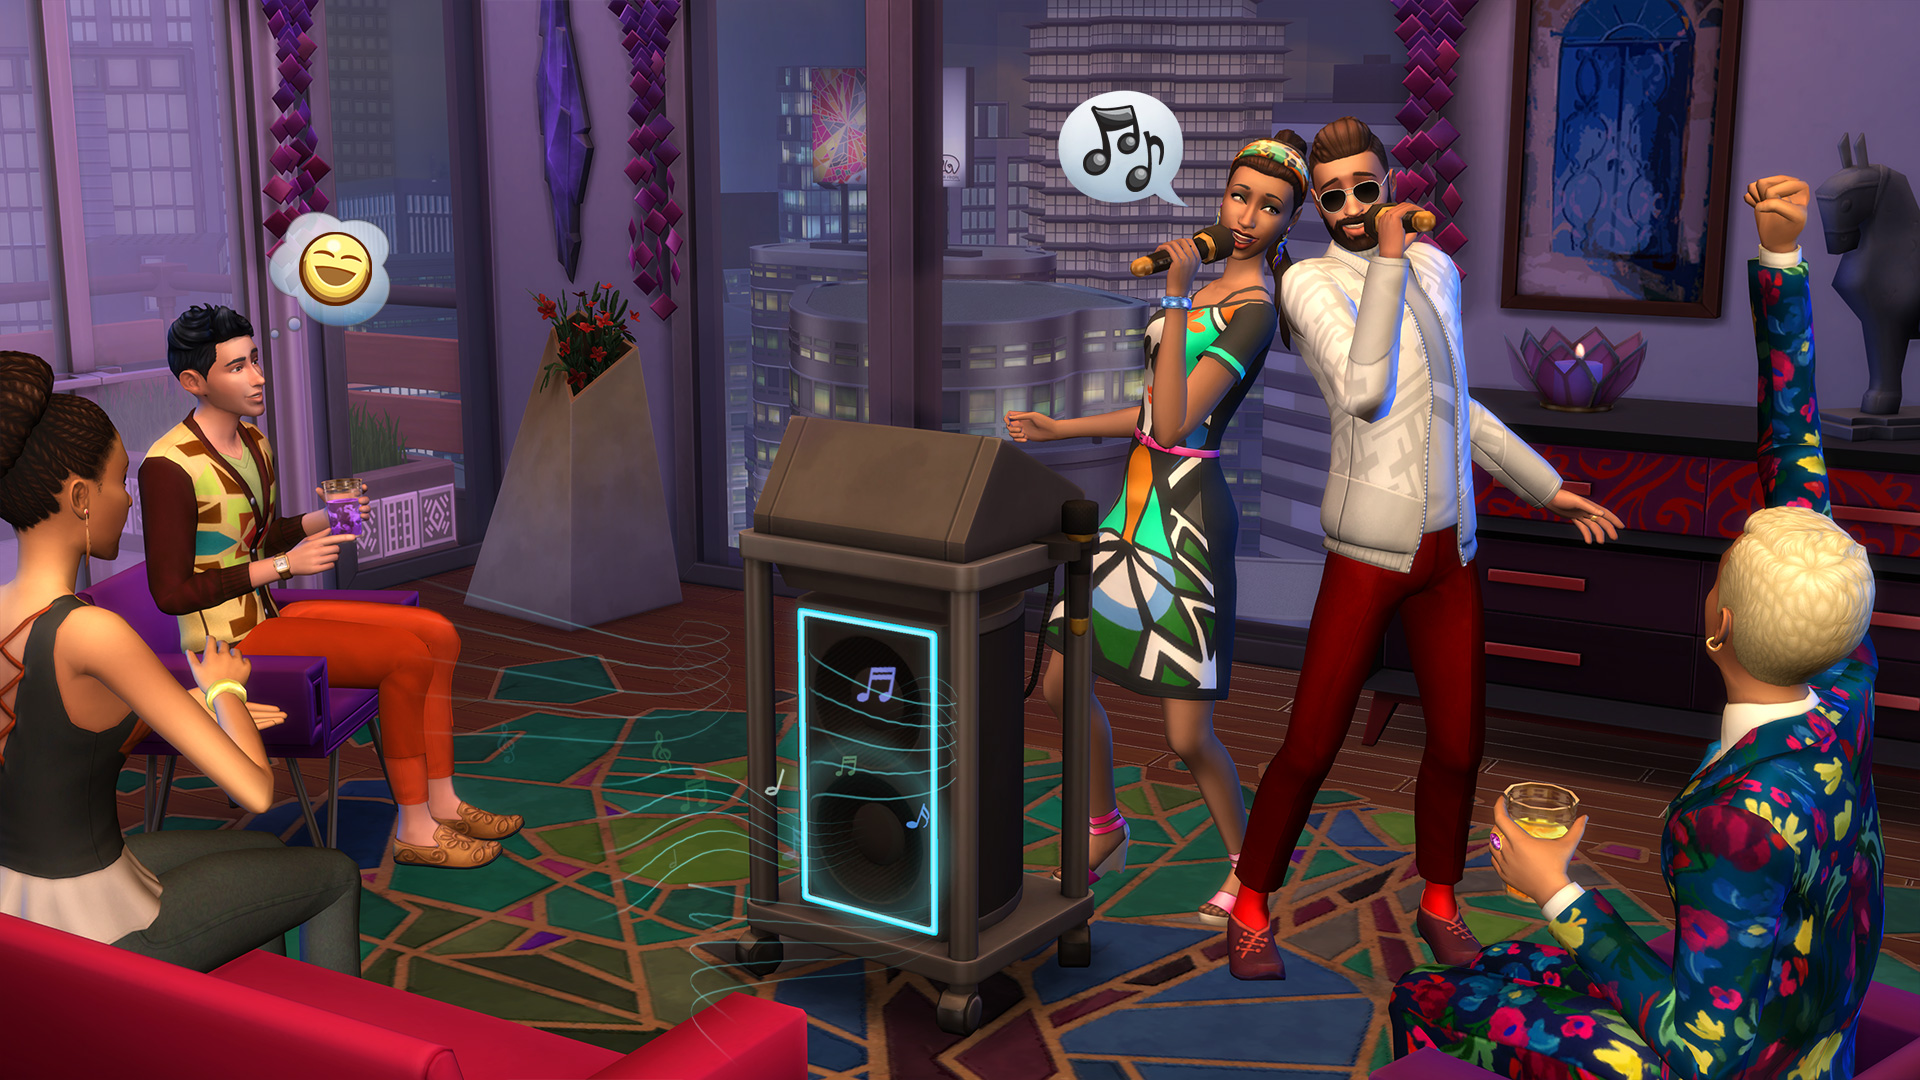 The Sims 2 Apartment Life Cheats For PC - GameSpot